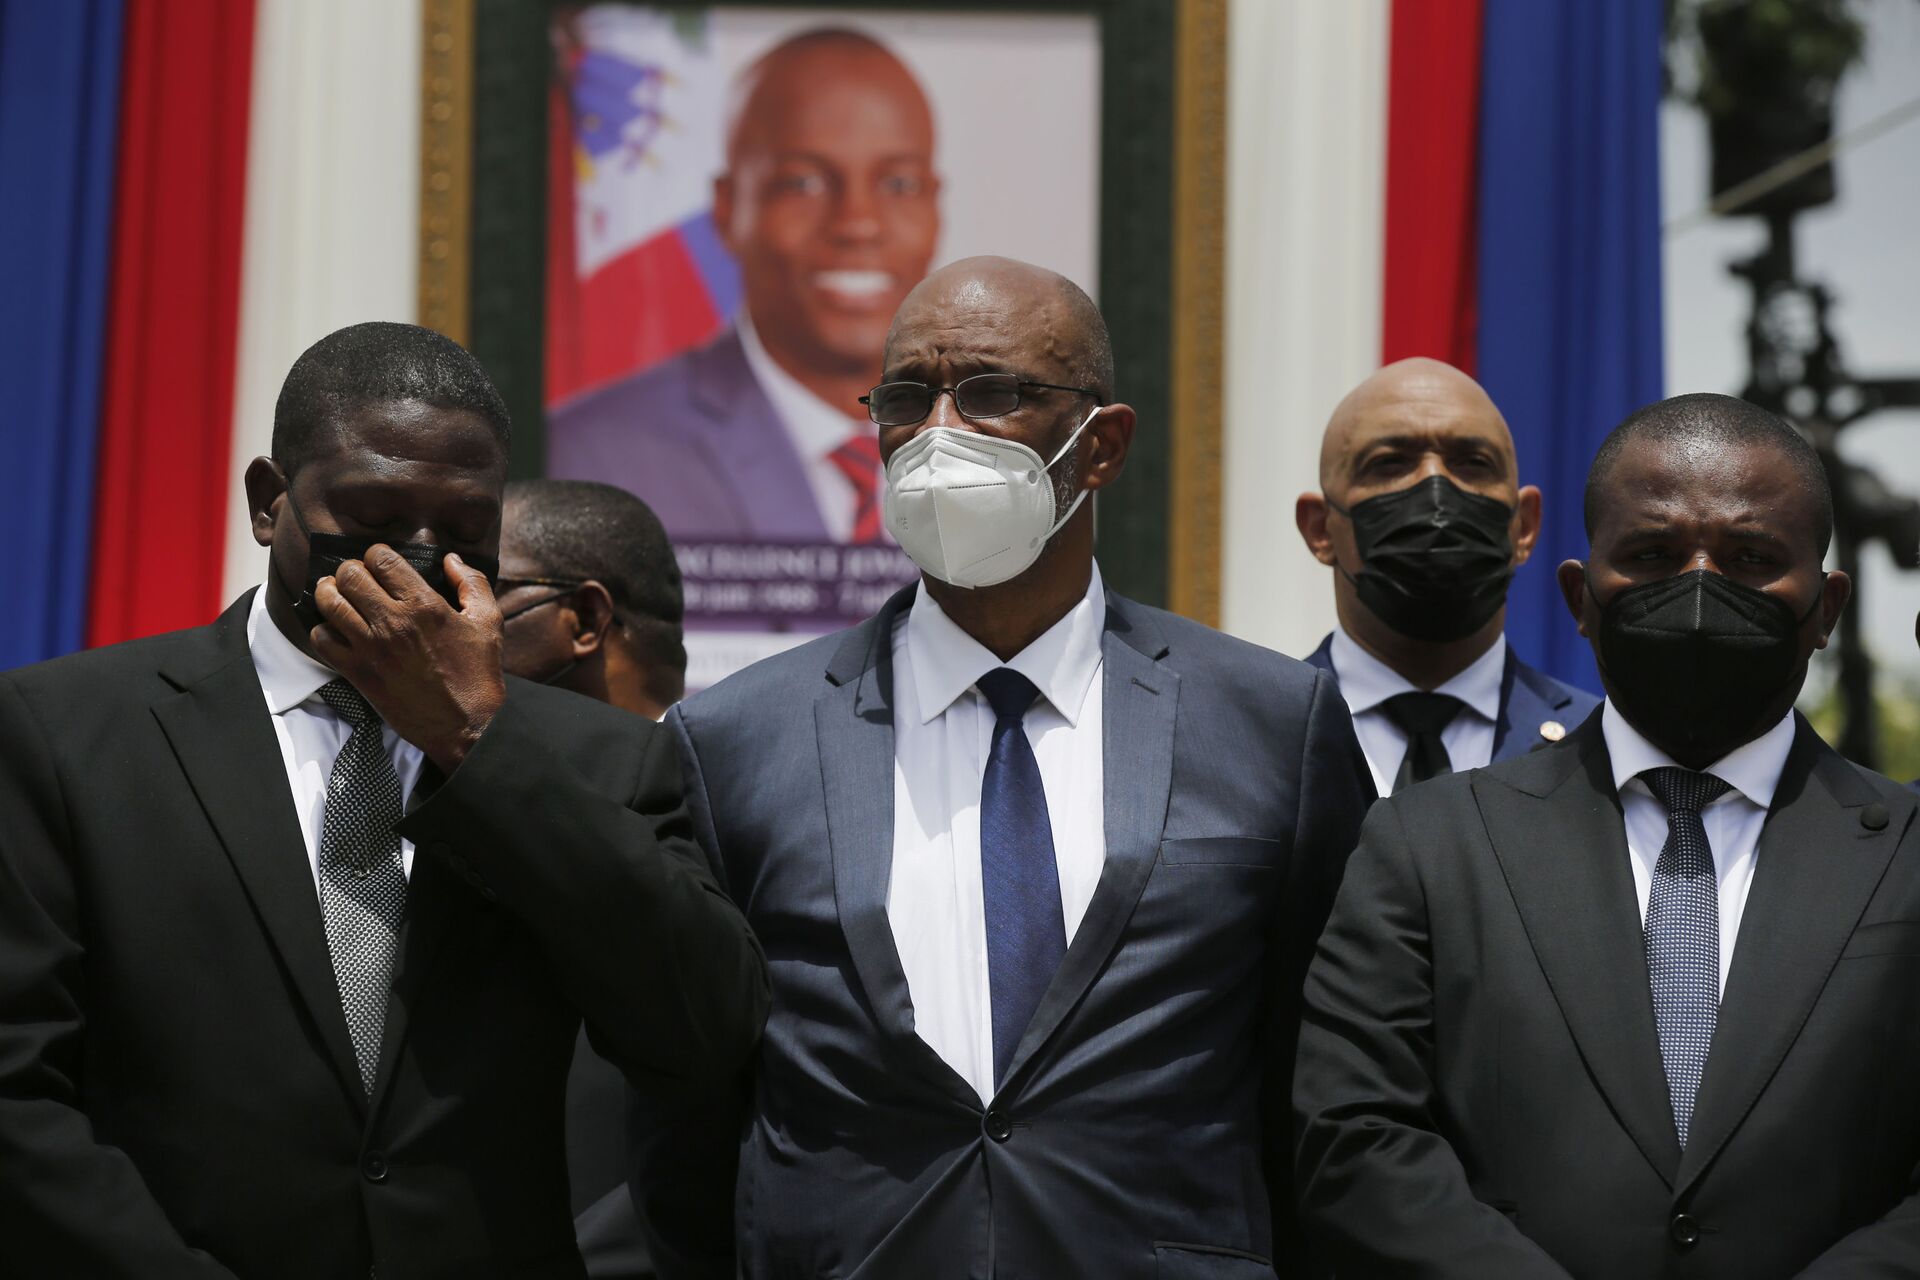 Haiti's designated Prime Minister Ariel Henry, center, and interim Prime Minister Claude Joseph, right, pose for a group photo with other authorities in front of a portrait of late Haitian President Jovenel Moise at at the National Pantheon Museum during a memorial service in Port-au-Prince, Haiti, Tuesday, July 20, 2021. - Sputnik International, 1920, 17.10.2022